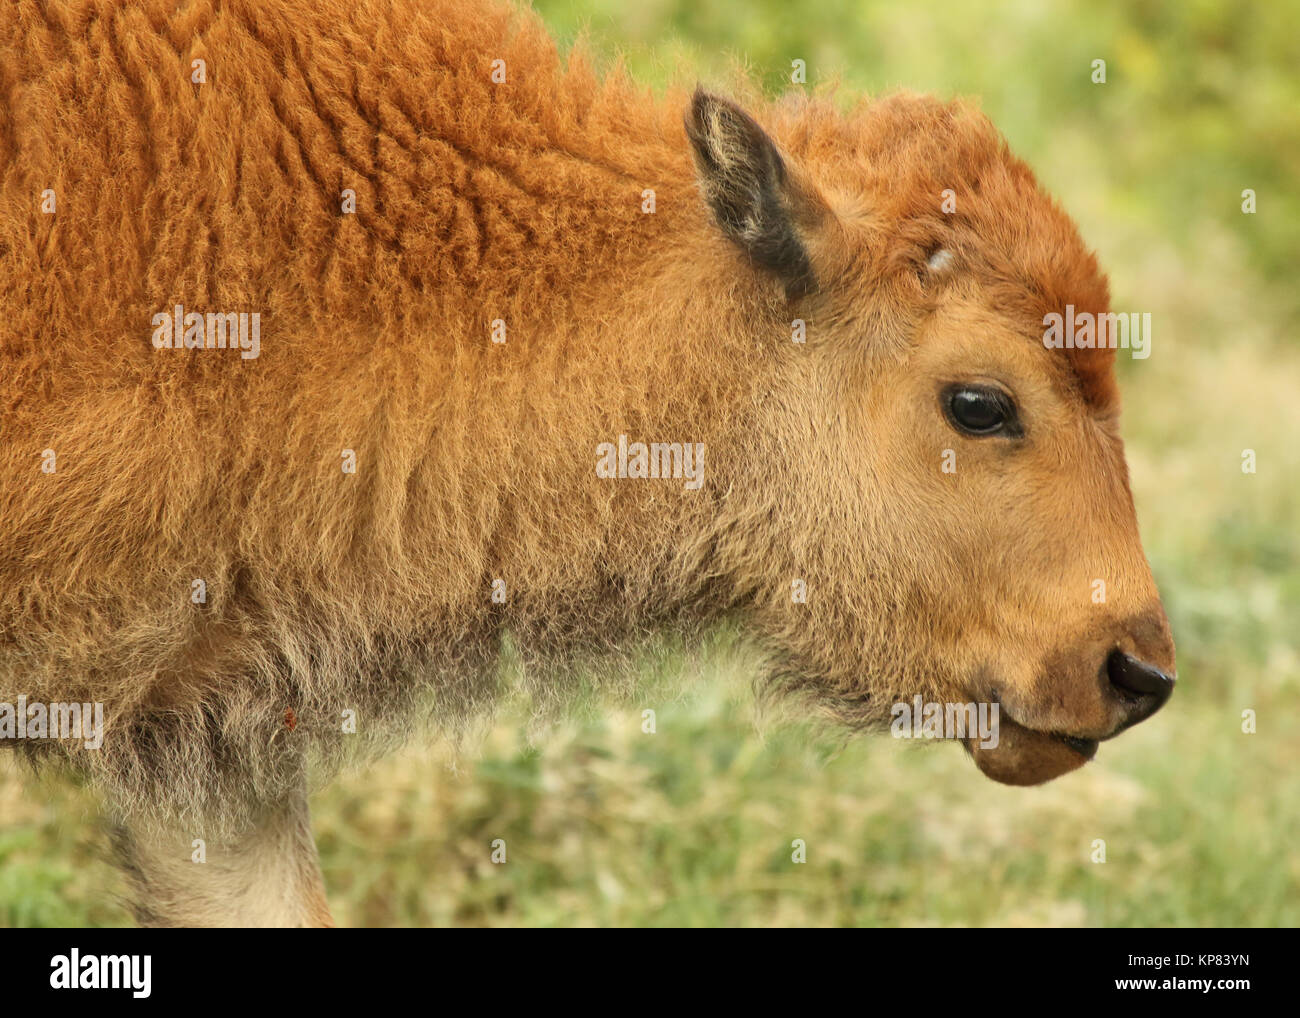 A portrait of a young American Bison calf. Stock Photo